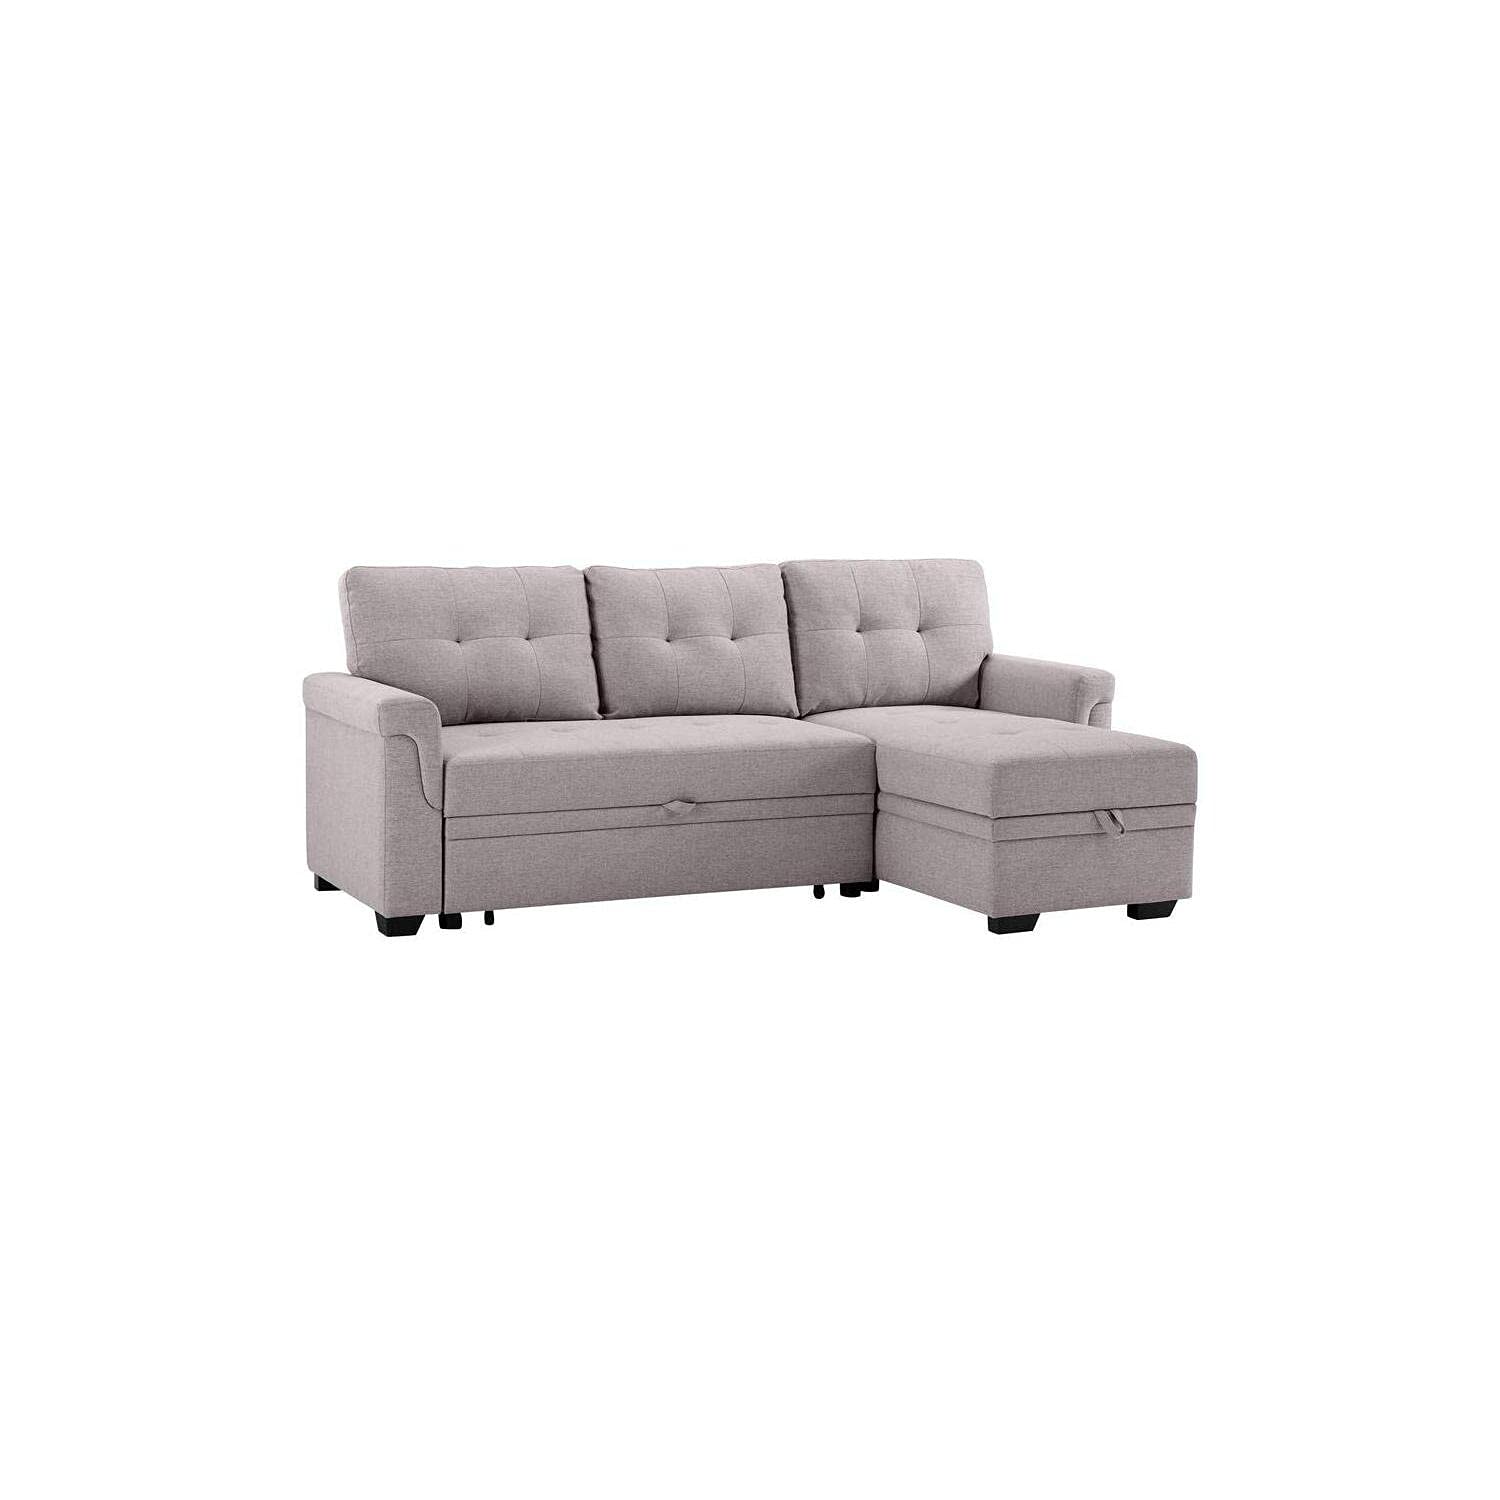 Lilola Home Linen Reversible Sleeper Sectional Sofa With Storage Chaise, Light Gray